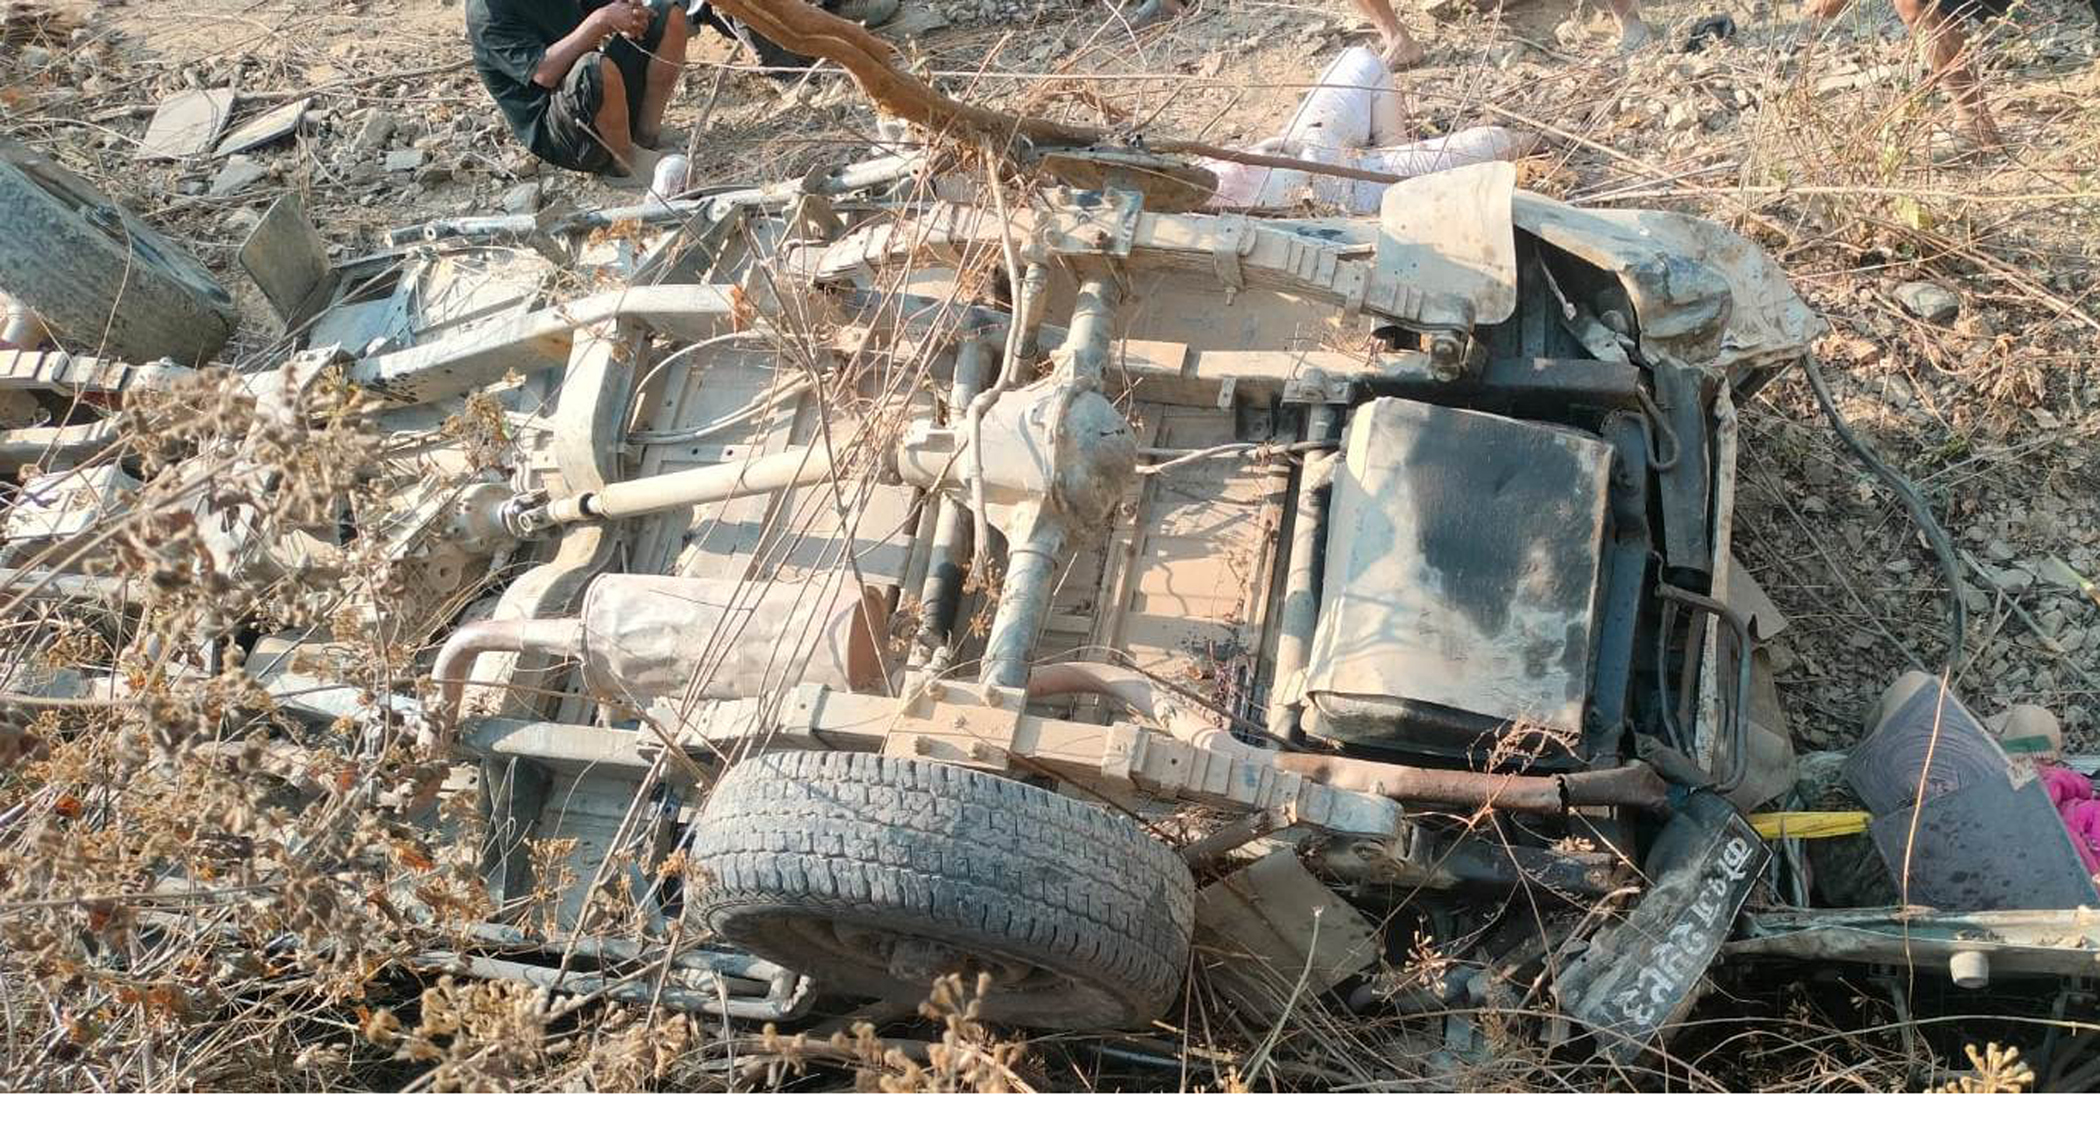 Jeep Accident Update: Death toll reaches eight, victims identified